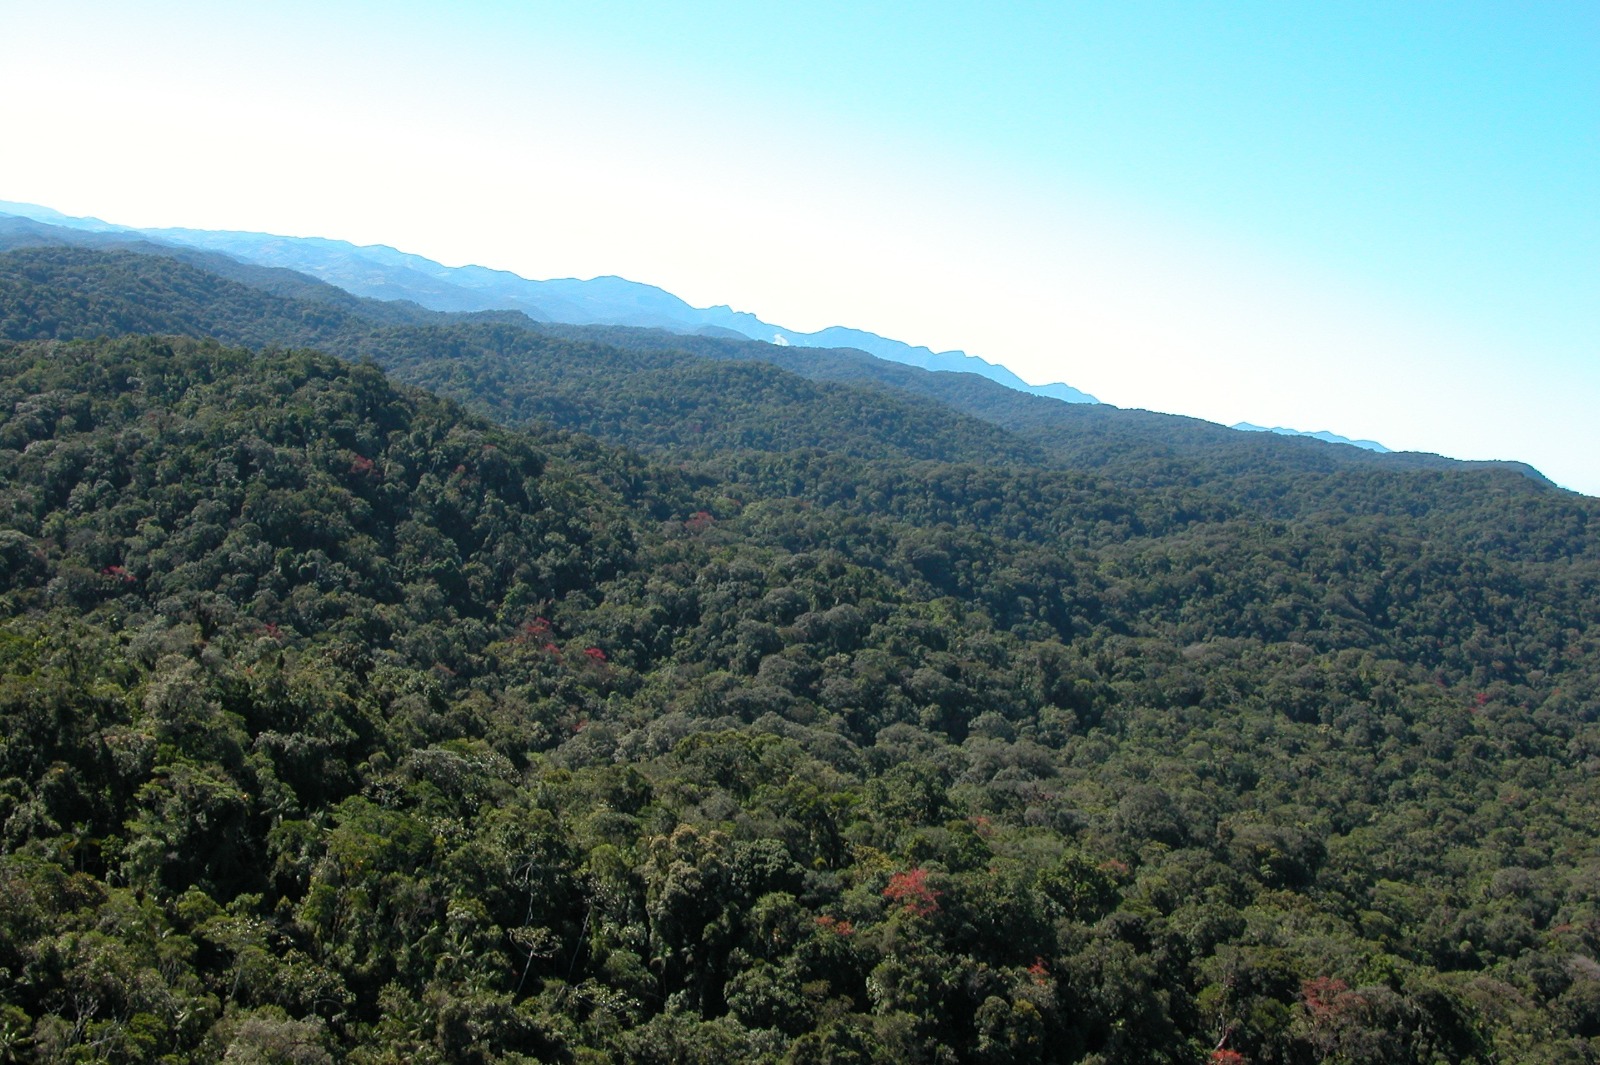 How a government program promoted conservation of Atlantic Rainforest remnants on rural properties